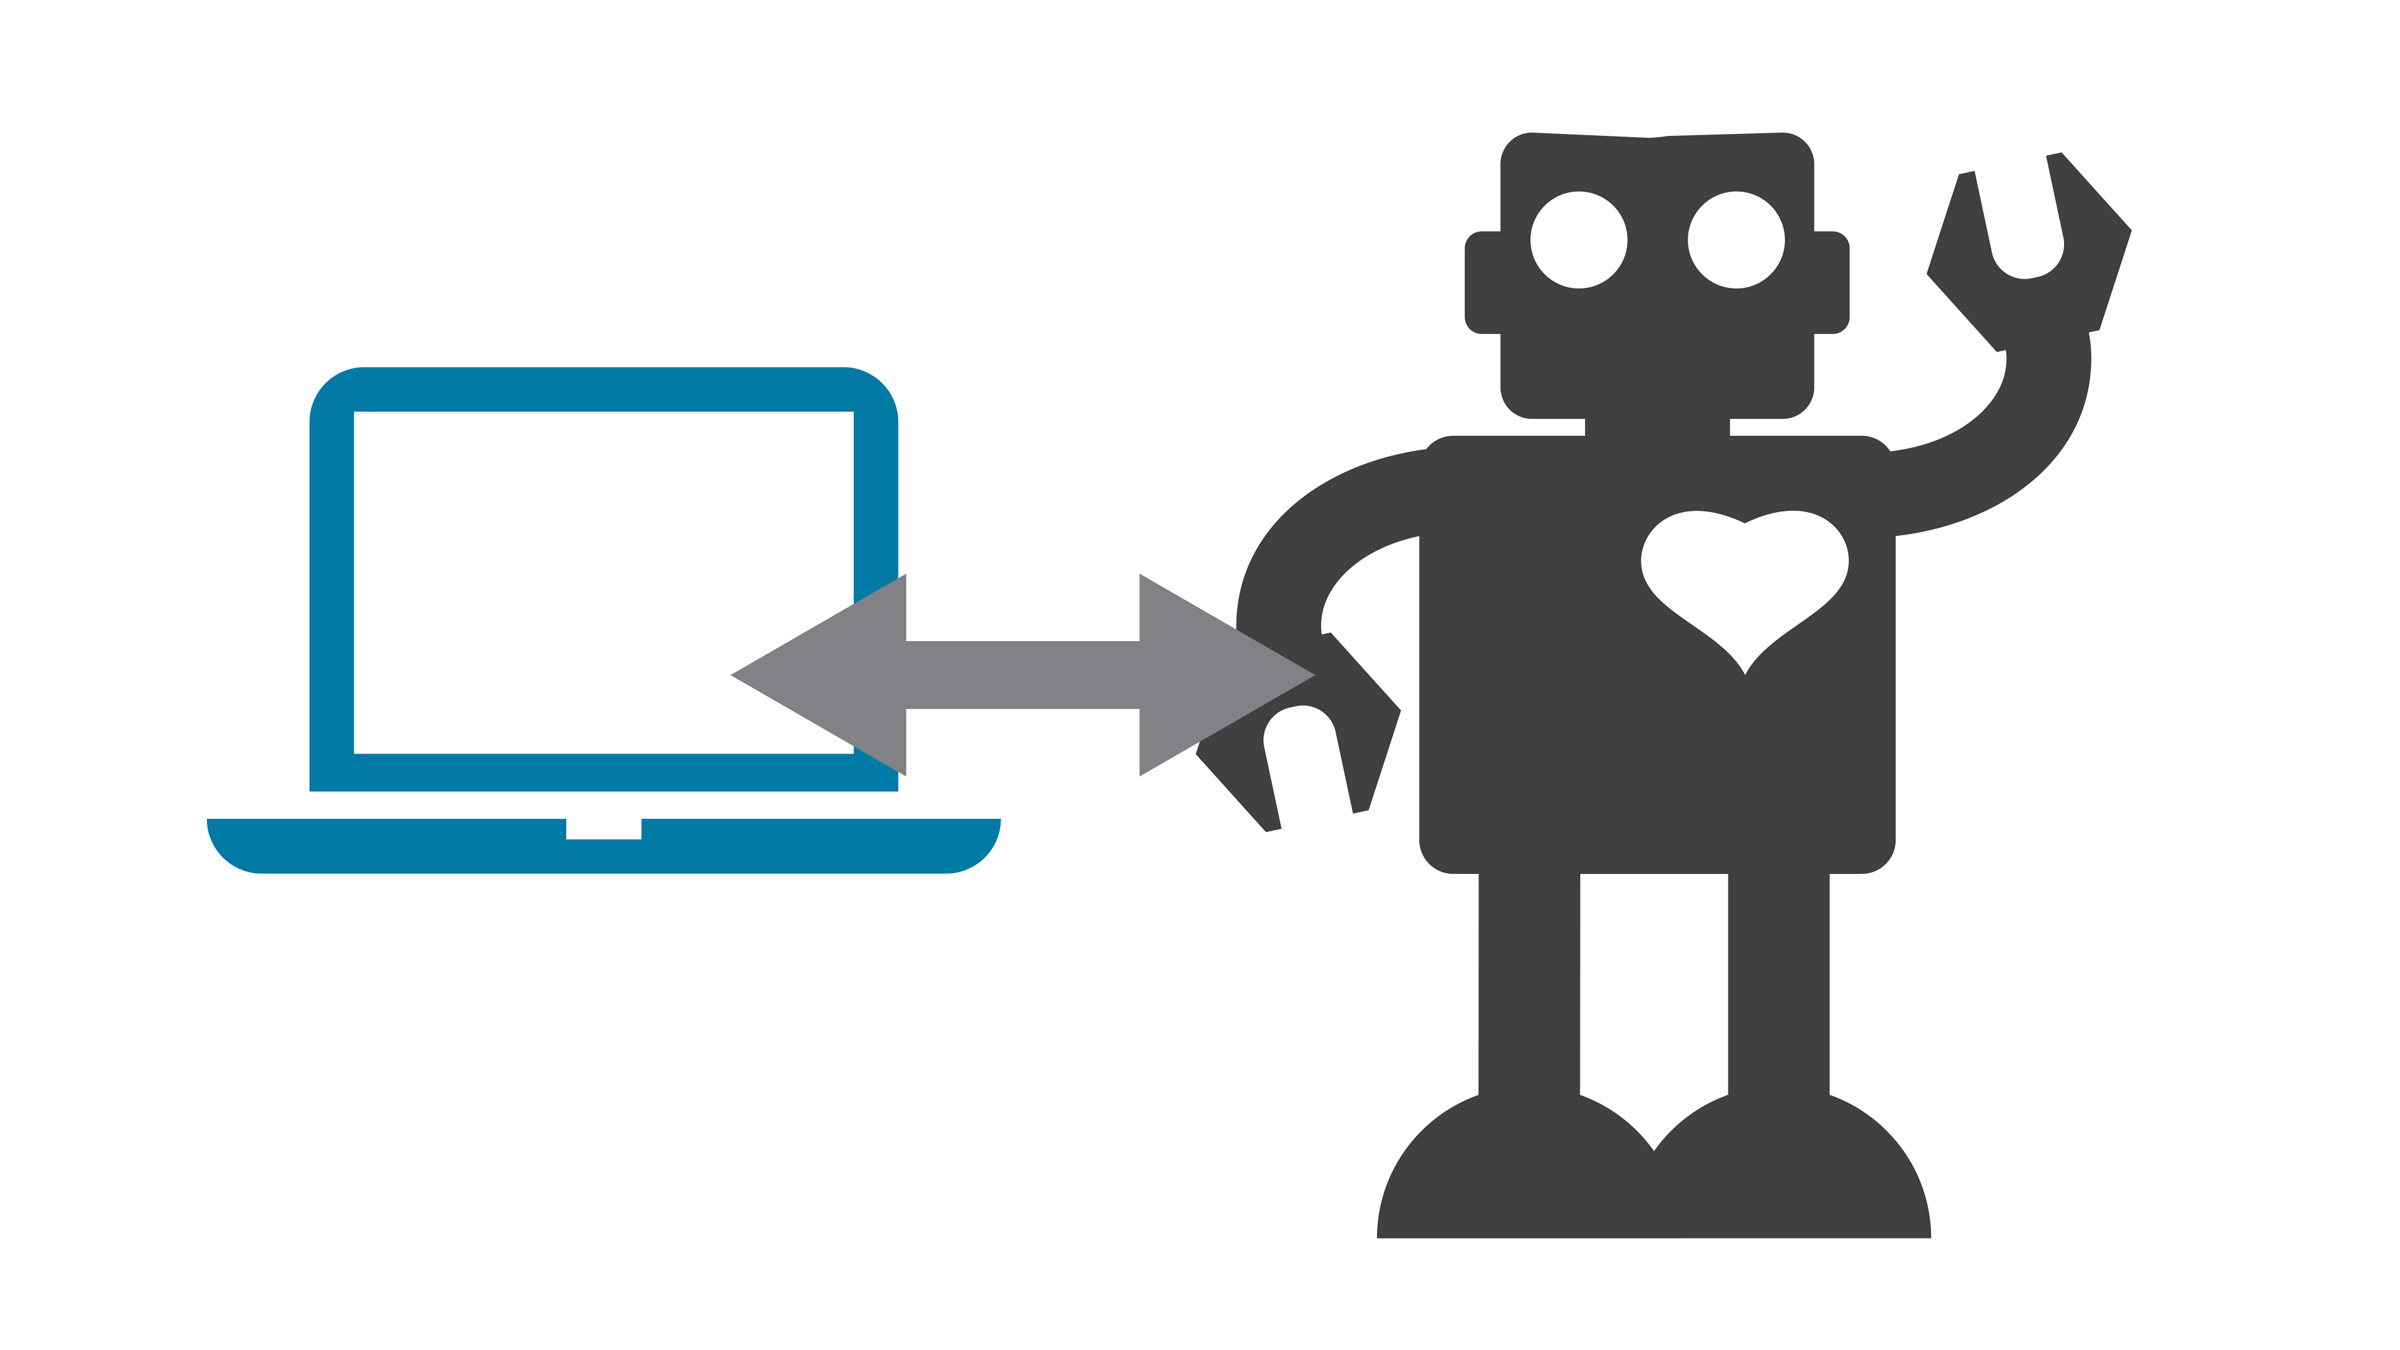 robot with heart on chest stands next to a computer display and keyboard, illustration